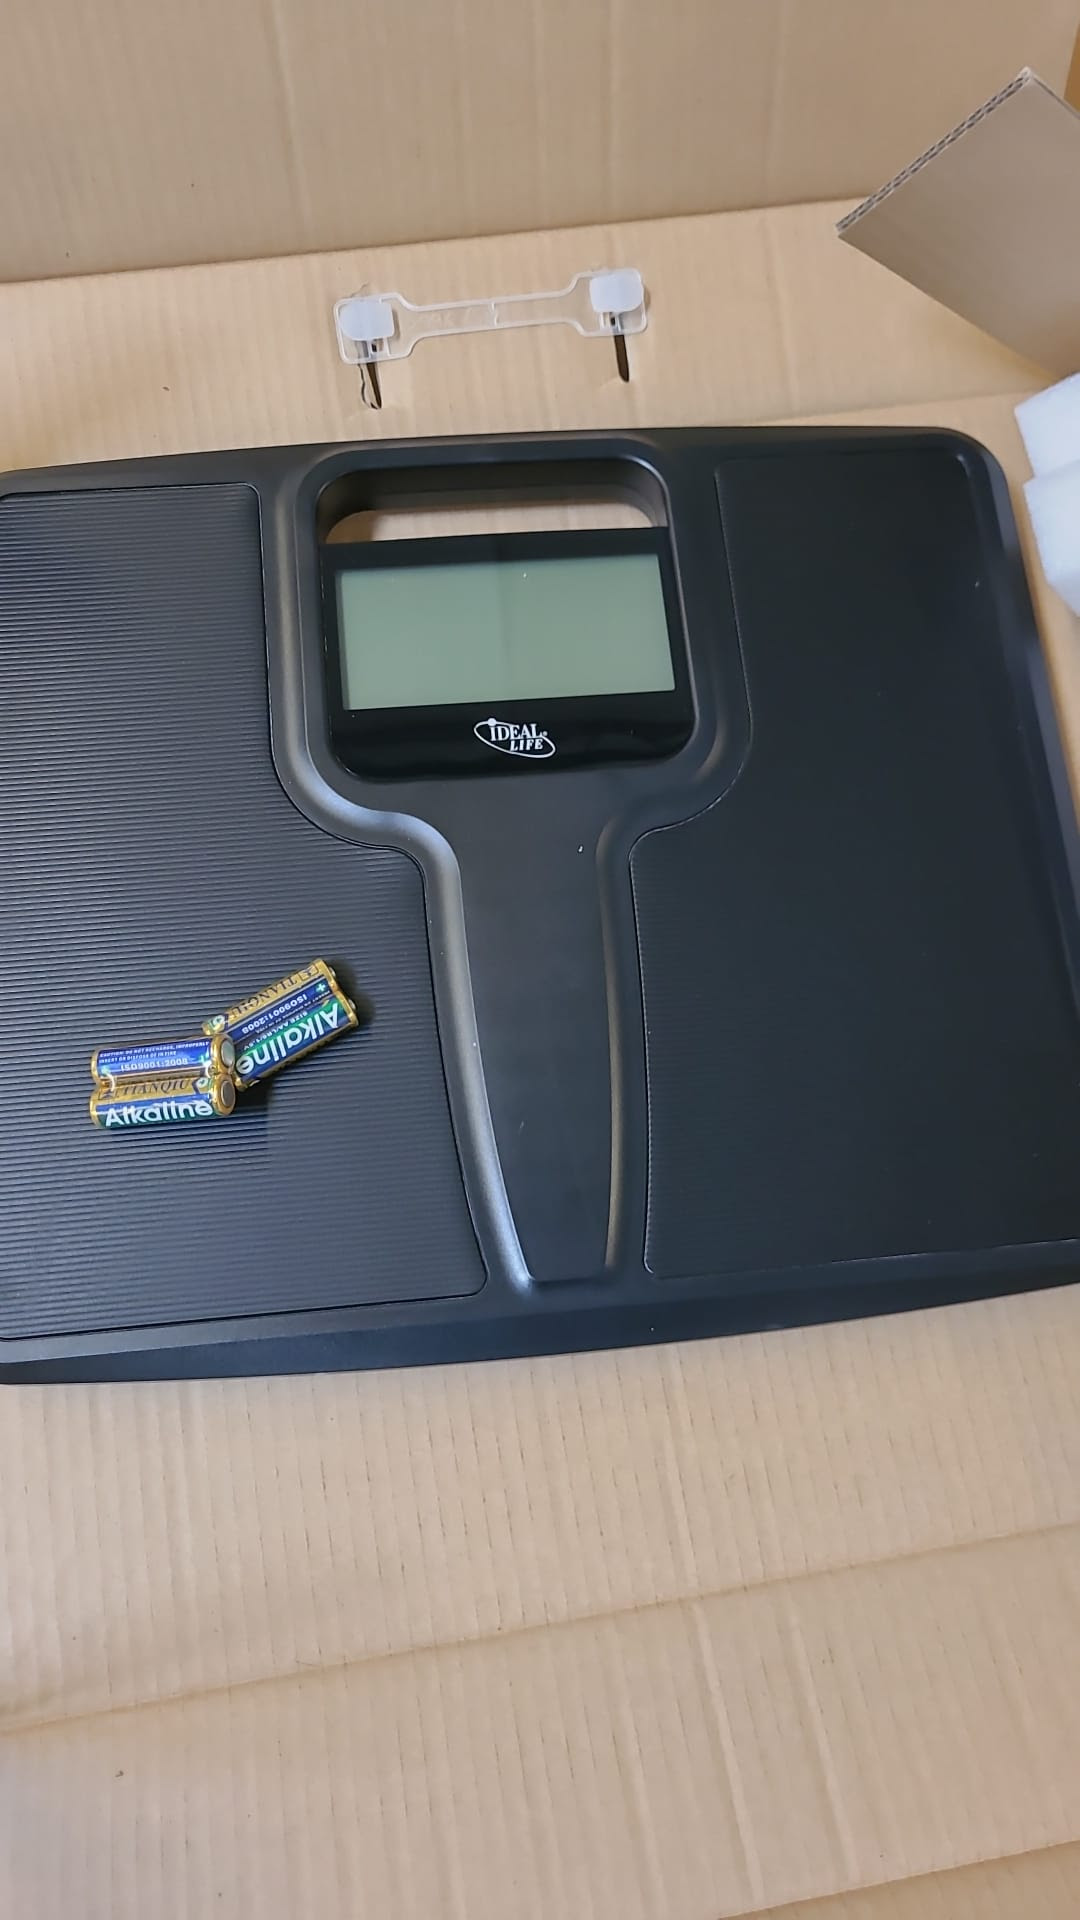 Ideal Life Digital Bluetooth Body Weight Scale. 